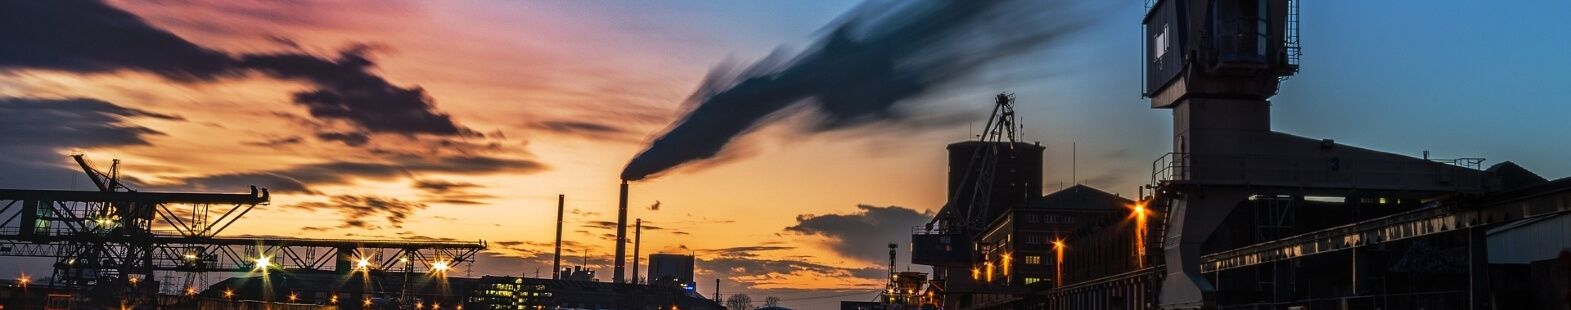 Banner Image for Gilbert's article on the origins of PM2.5 into Quebec shows a sunset skyline with smokestacks